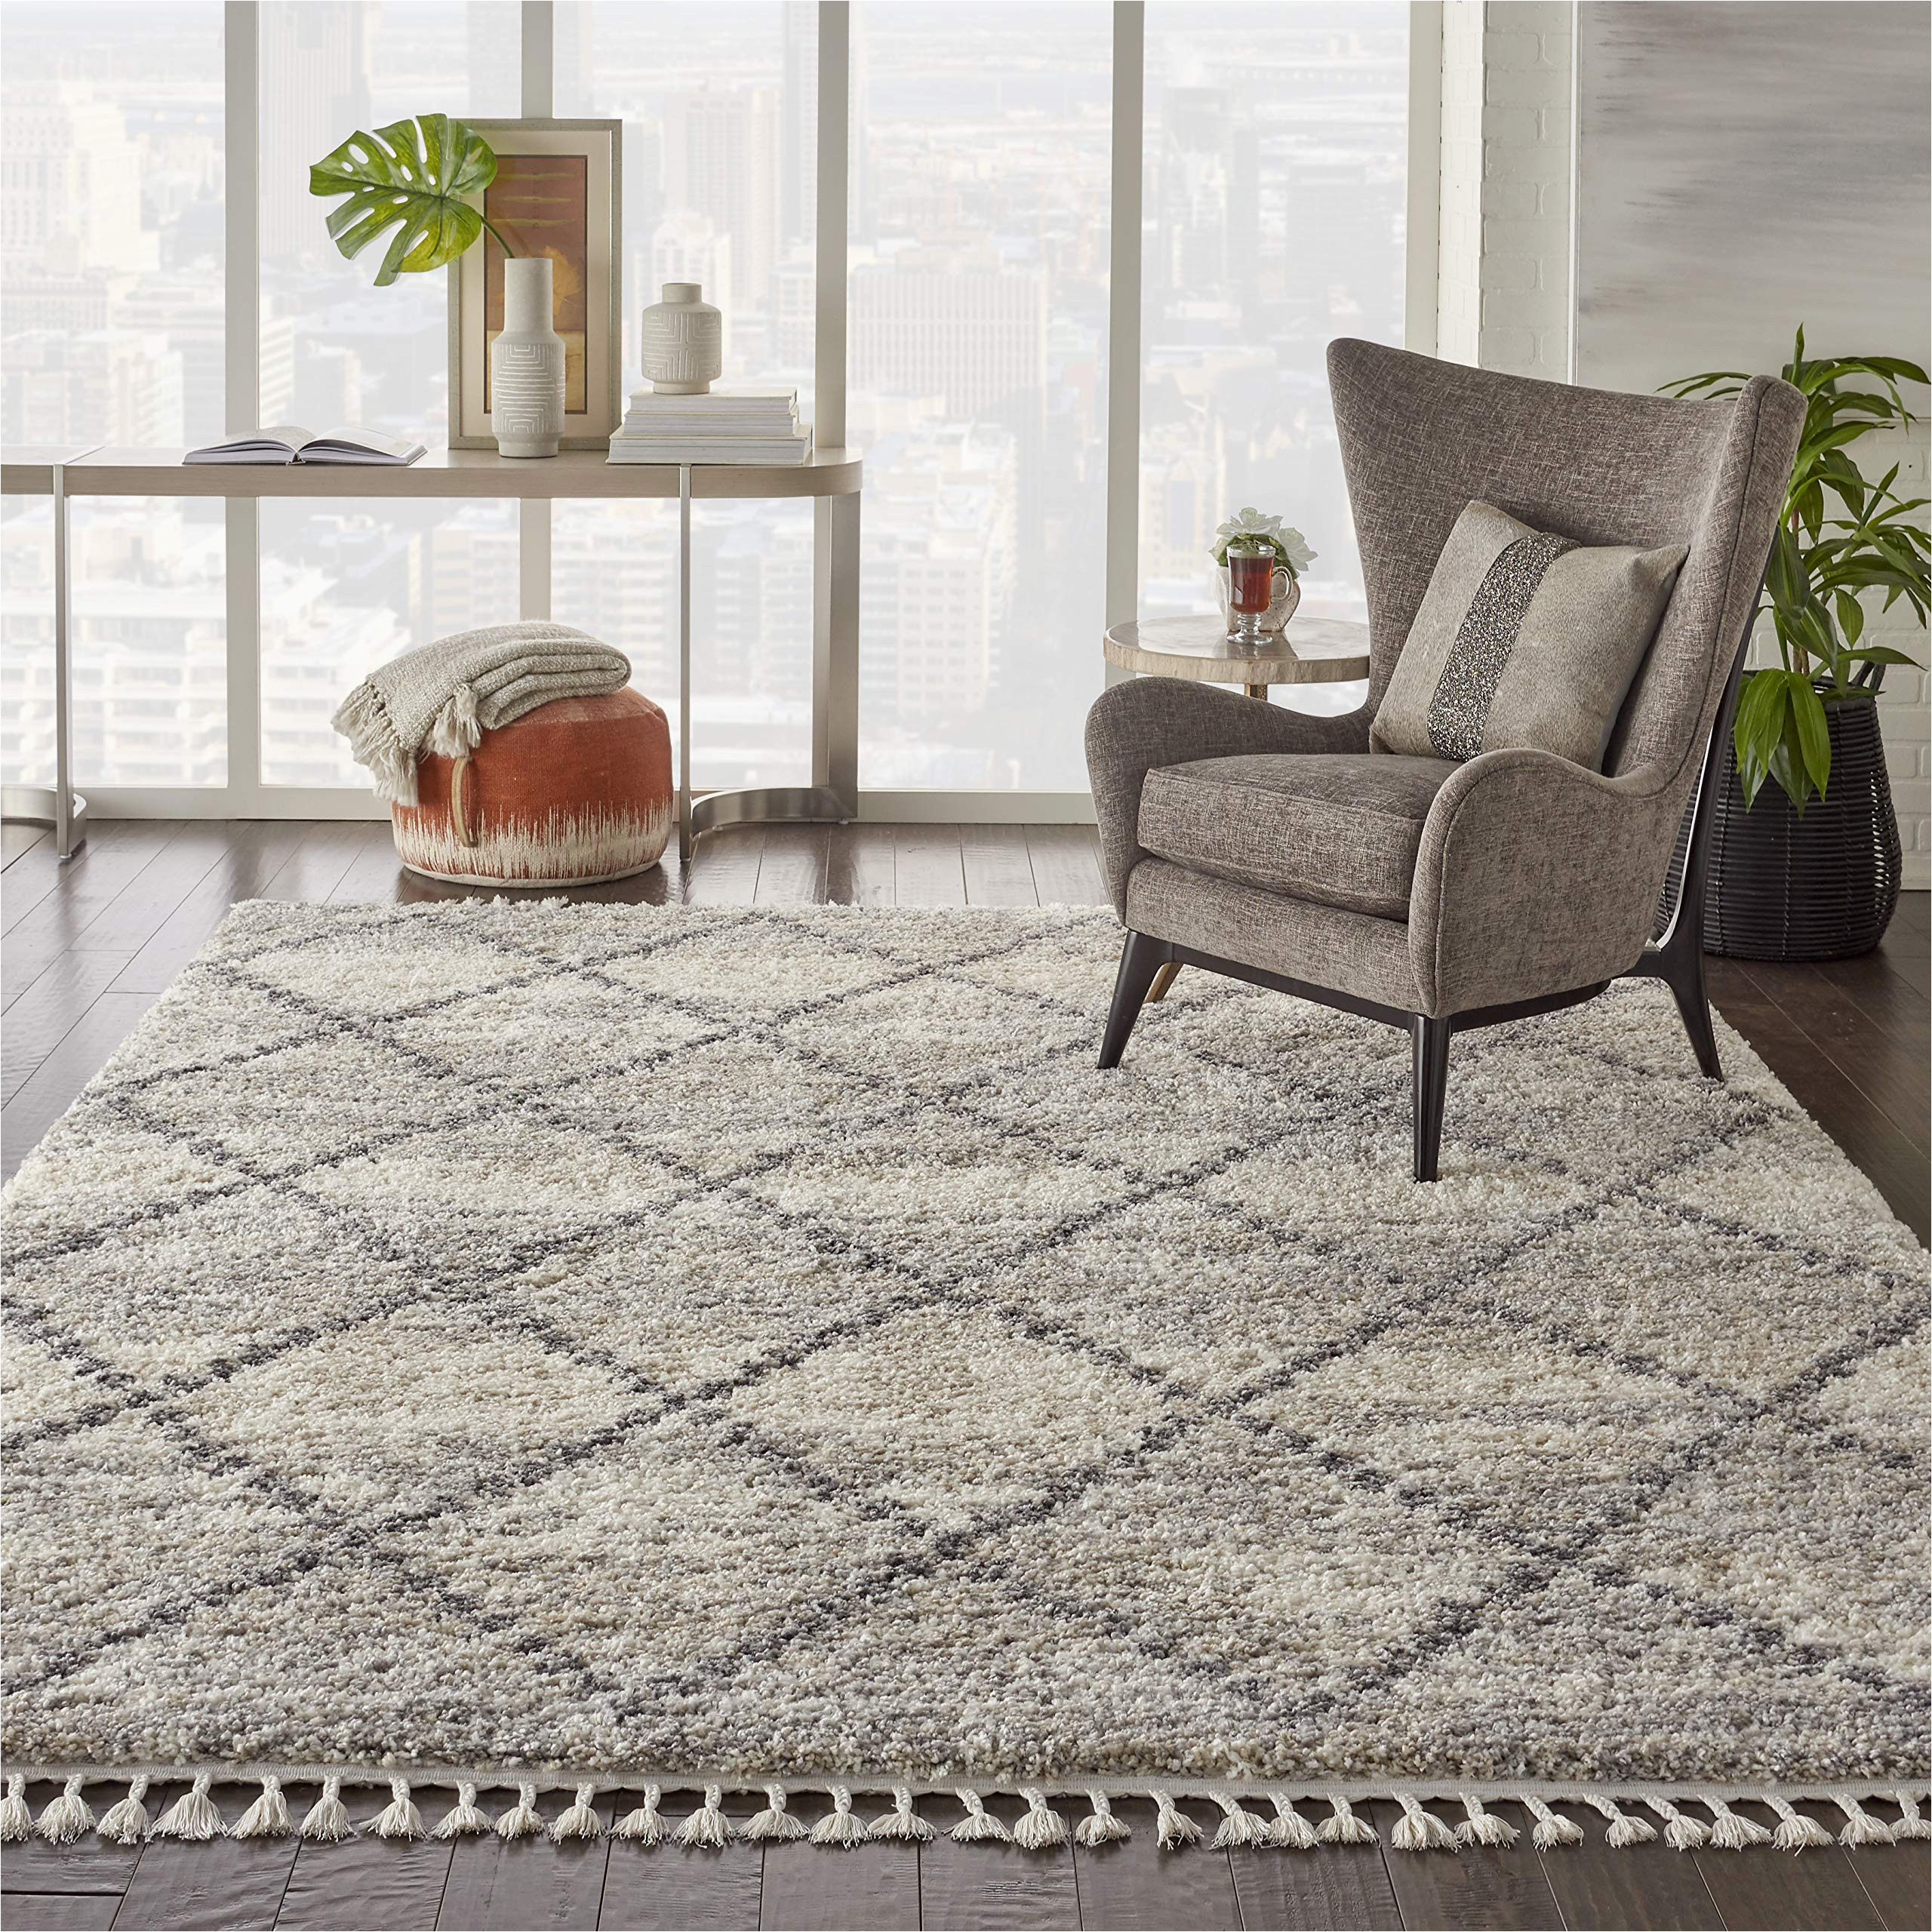 9 by 12 area Rugs for Sale Nourison Scandinavian Shag Ivory/grey 9′ X 12′ area Rug, Easy Cleaning, Non Shedding, Bed Room, Living Room, Dining Room, Kitchen (9×12)